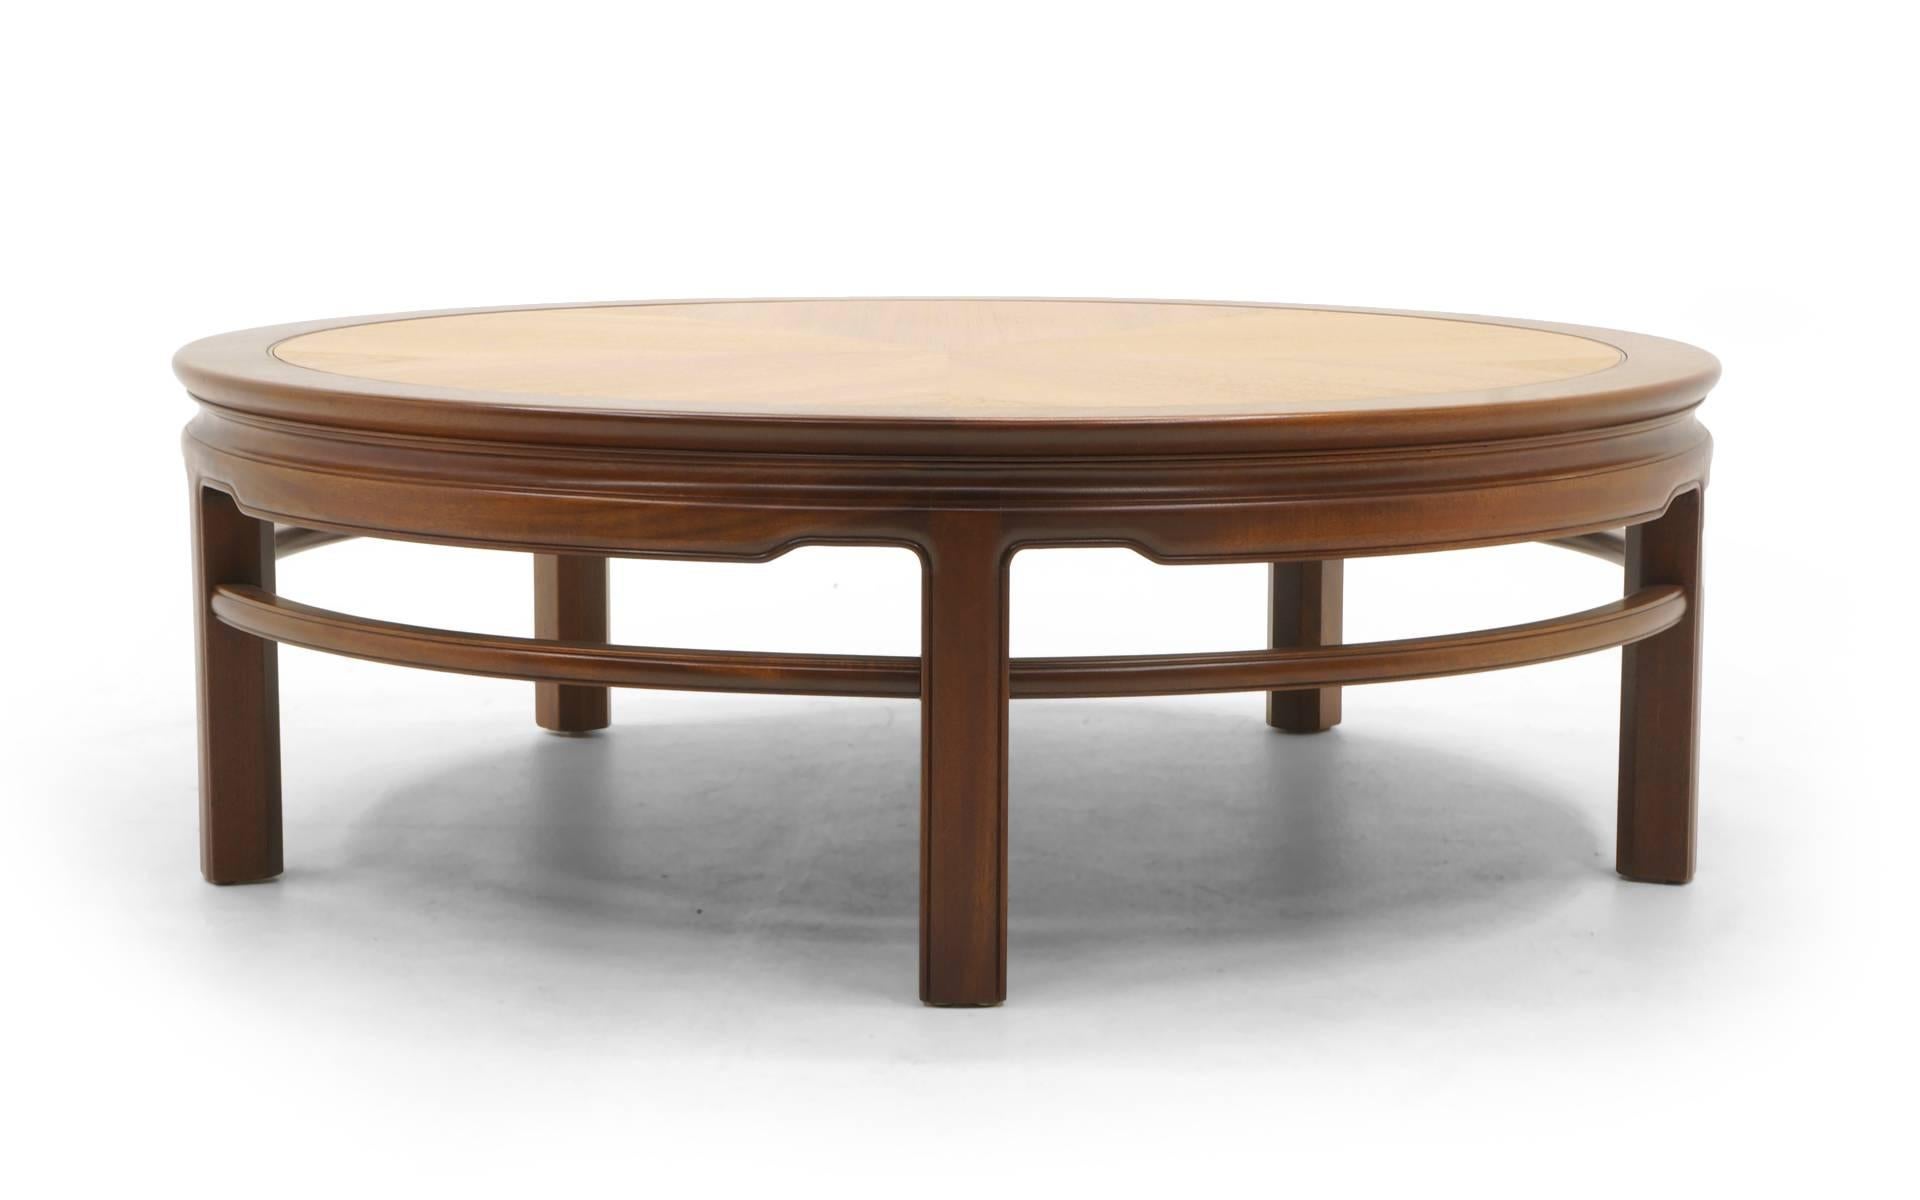 Round coffee/cocktail table manufactured by Kittinger, 1950s. Expertly restored teak top with mahogany trim, legs and stretchers. Asian inspired design. High quality construction.